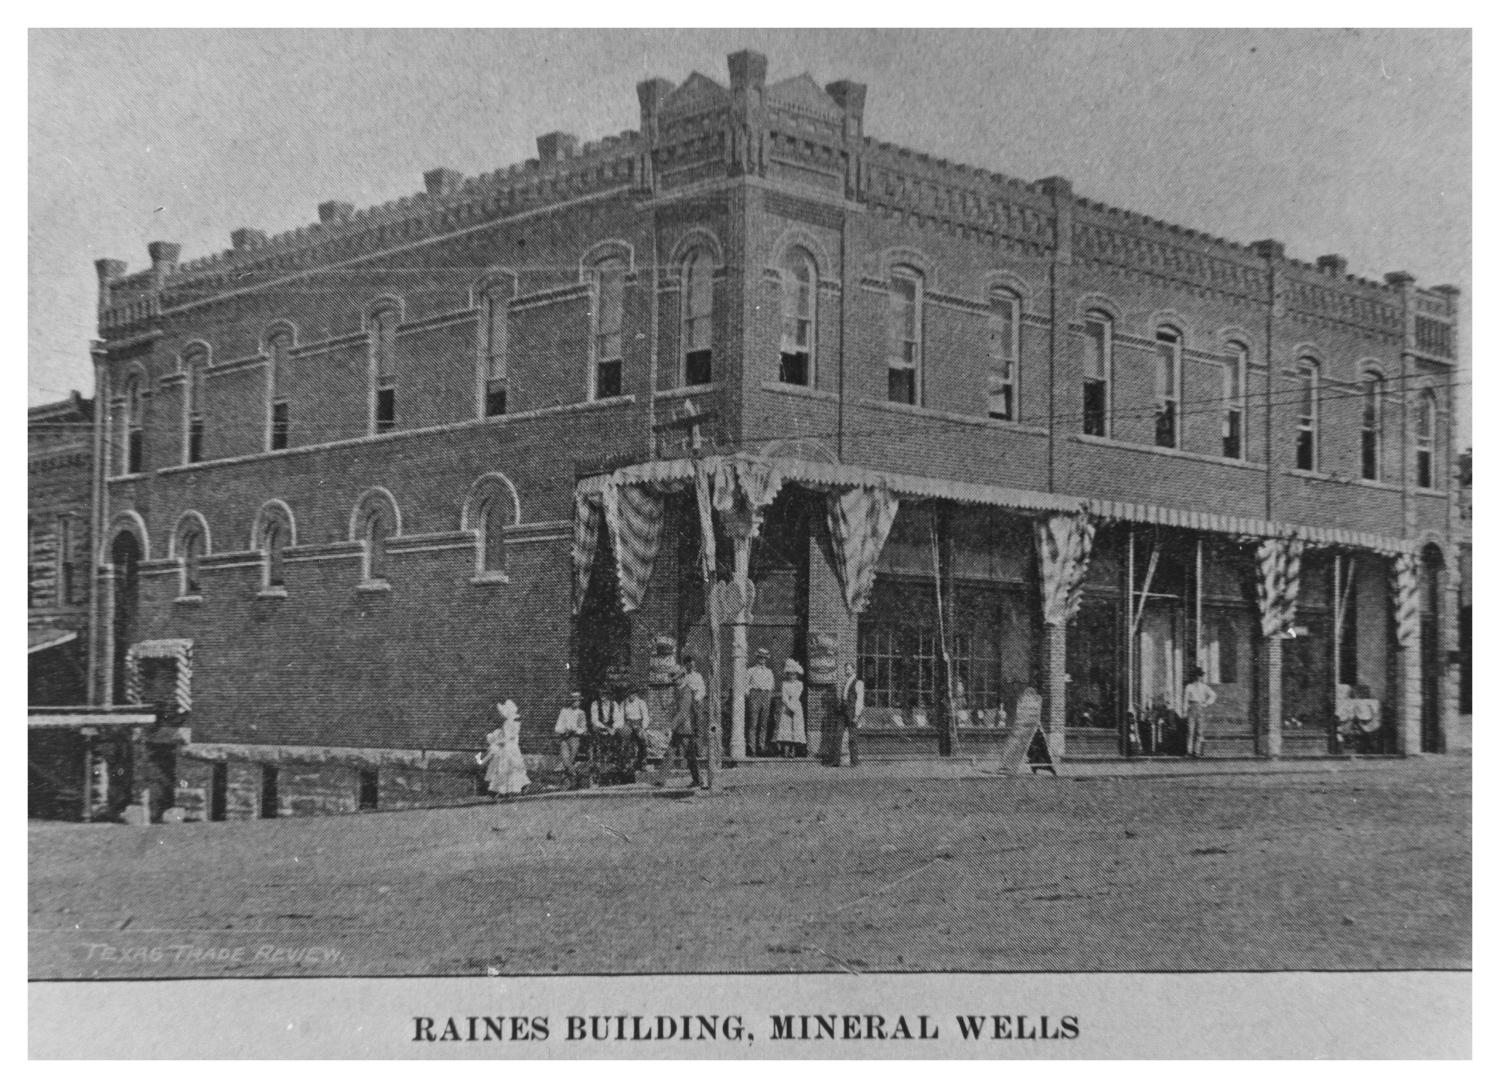 The Raines Building, Mineral Wells
                                                
                                                    [Sequence #]: 1 of 1
                                                